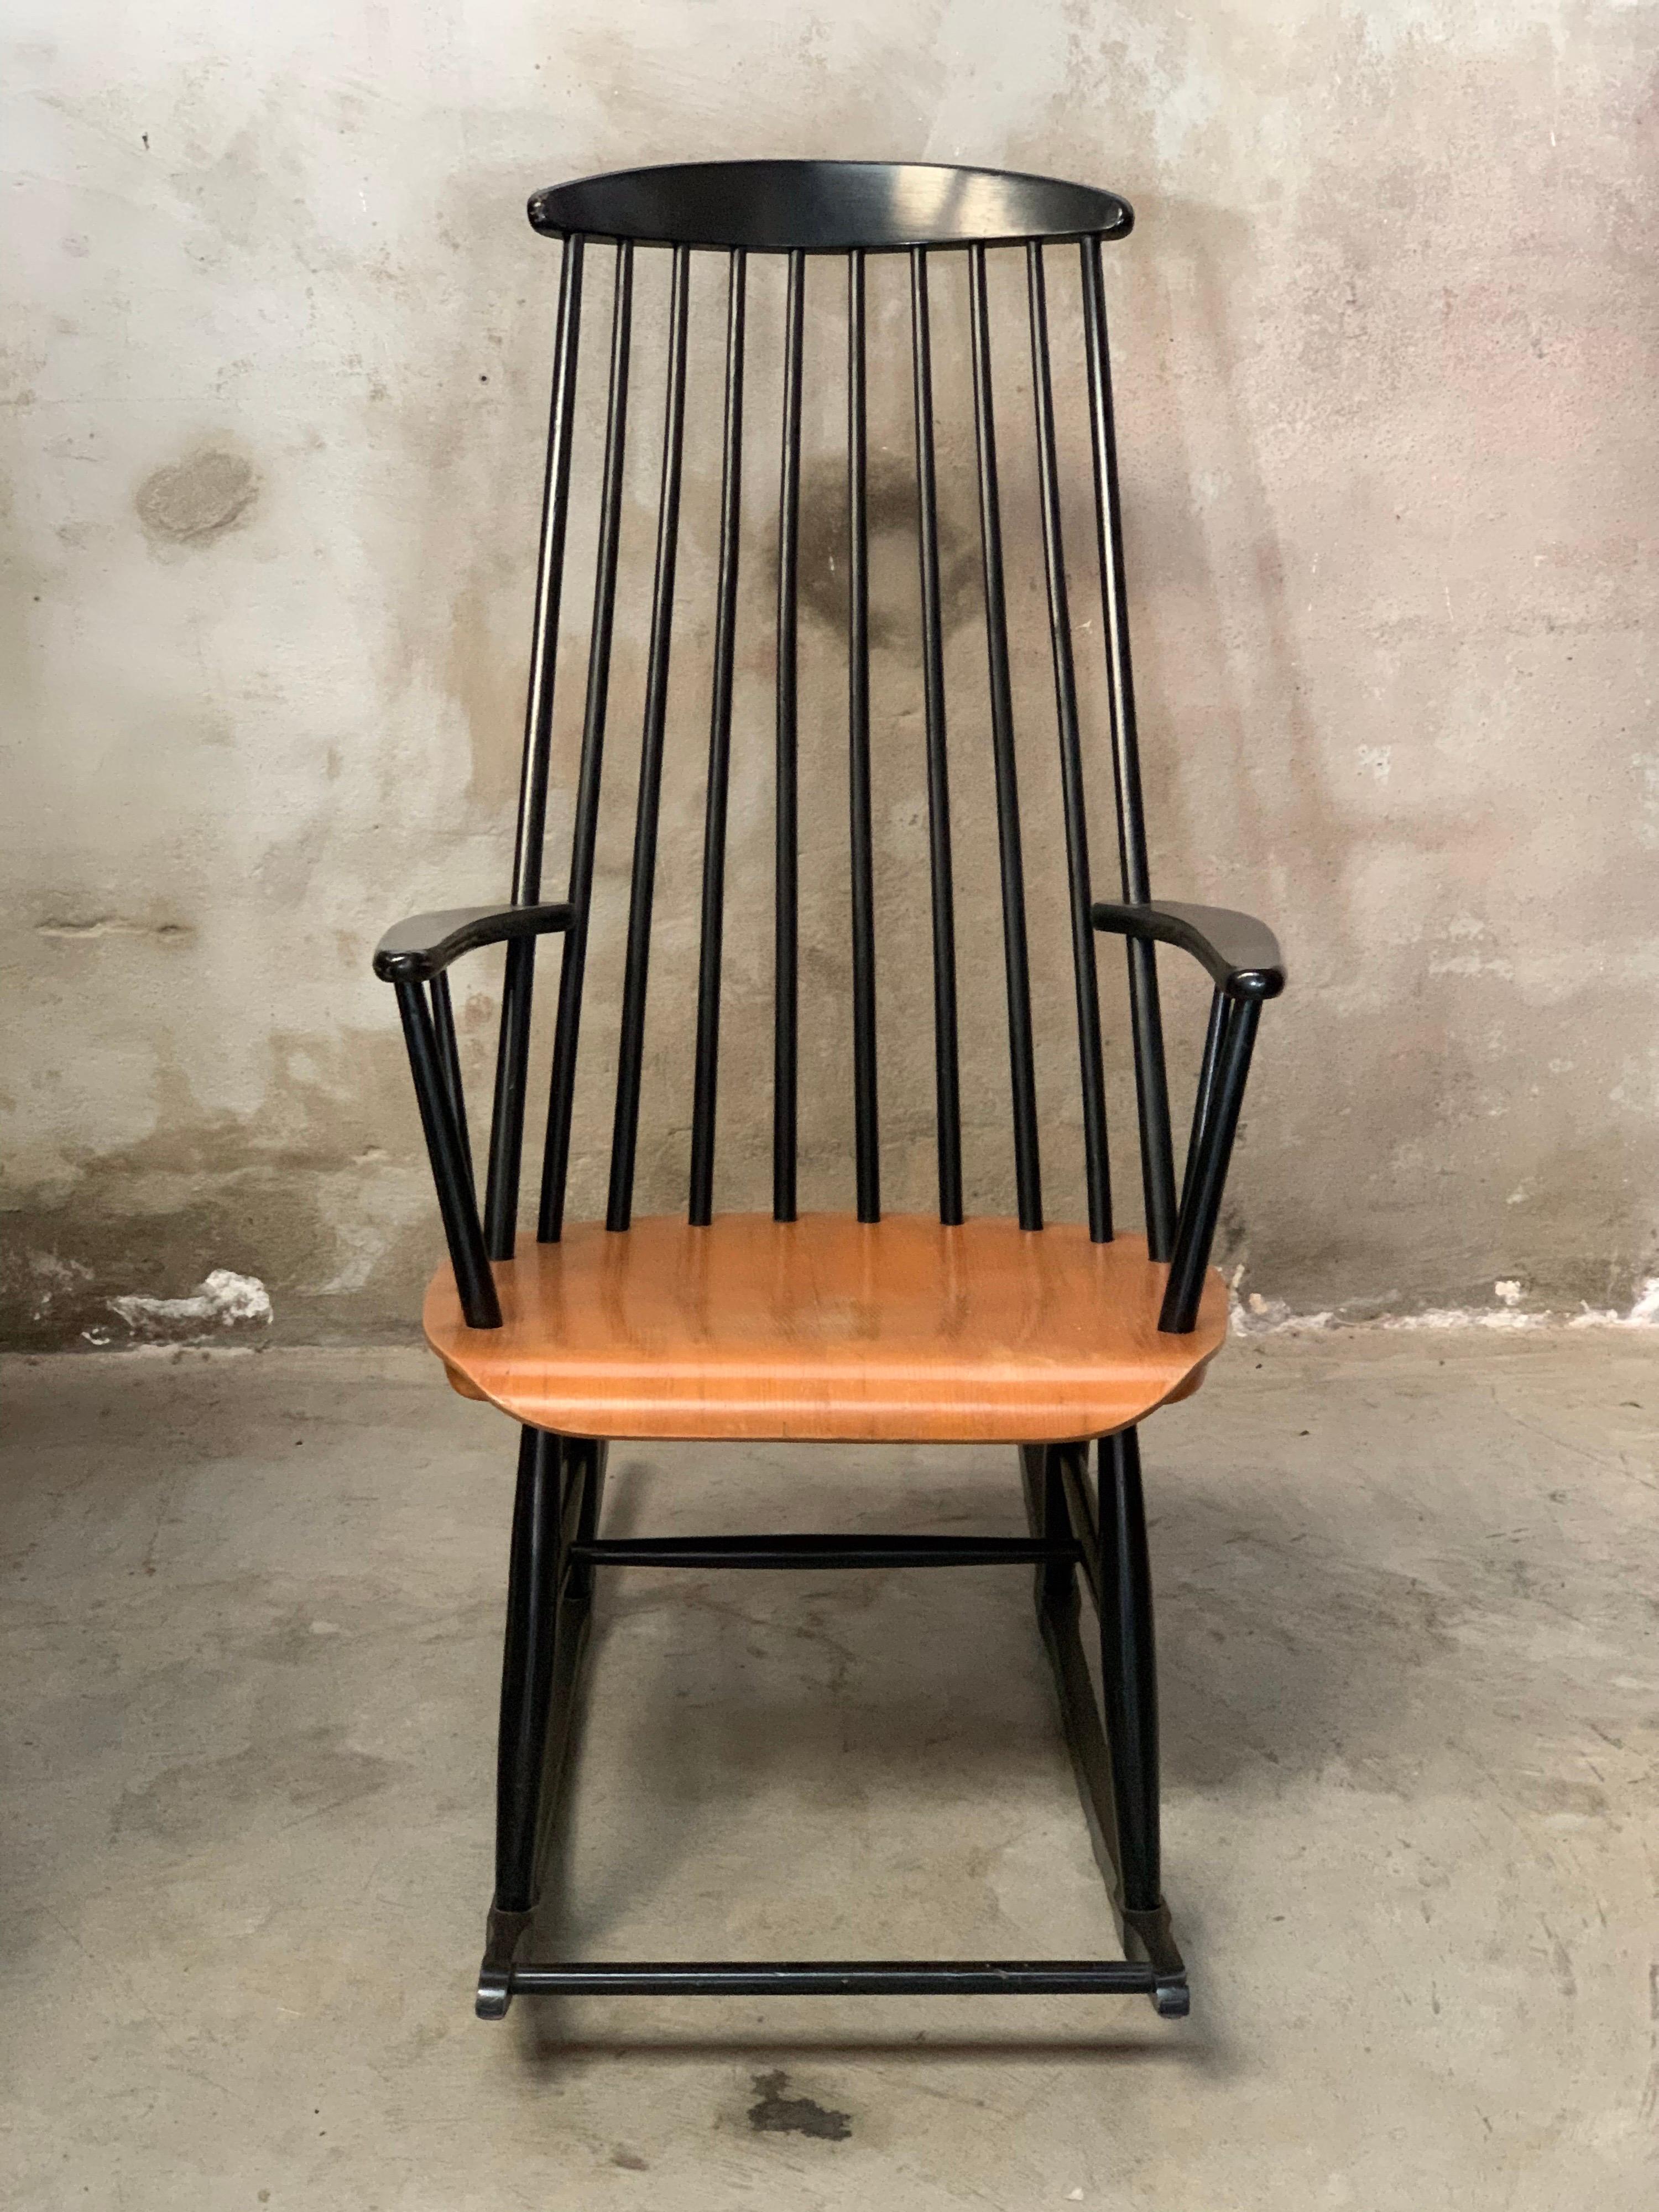 Beautiful 60s/70s rocking chair, Mademoiselle rocking chair. Inspired by Ilmari Tapiovaara. Pastoe style. Beautiful curved beech seat. Light signs of wear after 50 years and therefore still a beauty!

The whole is about 110 cm high, 60 cm wide and